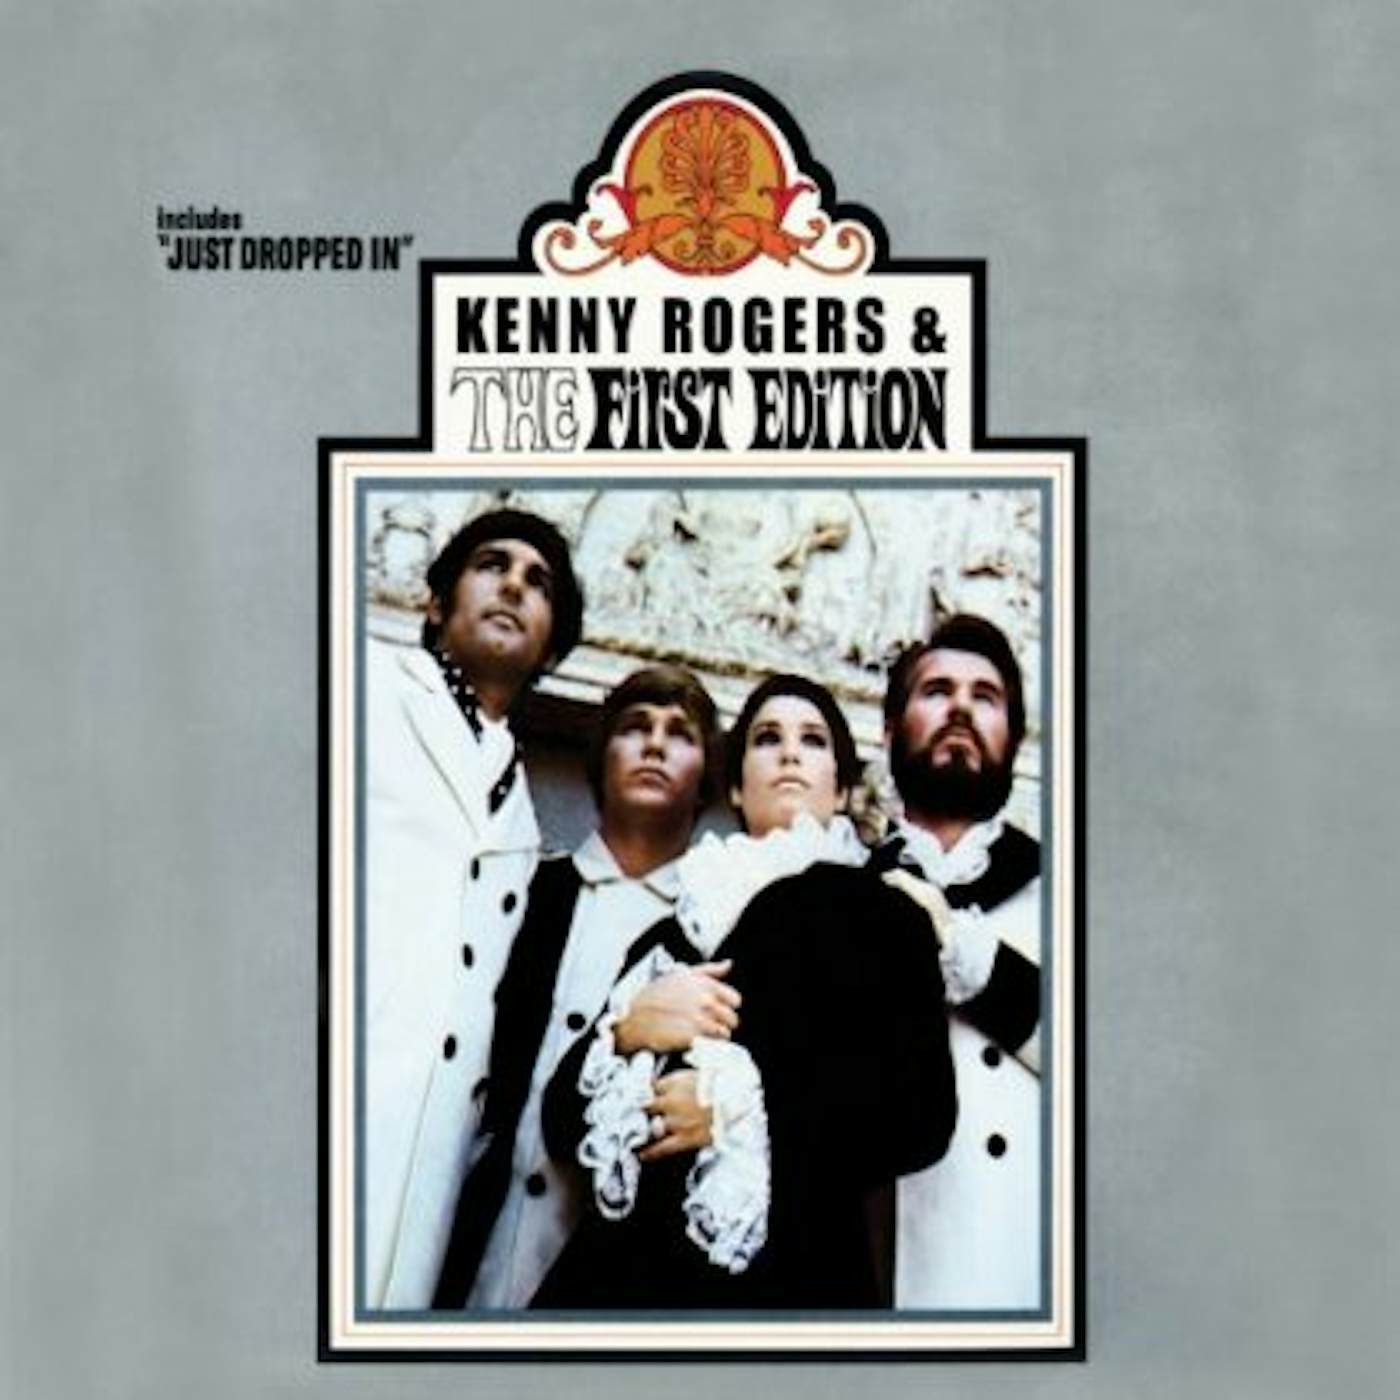 Kenny Rogers & The First Edition FIRST EDITION CD